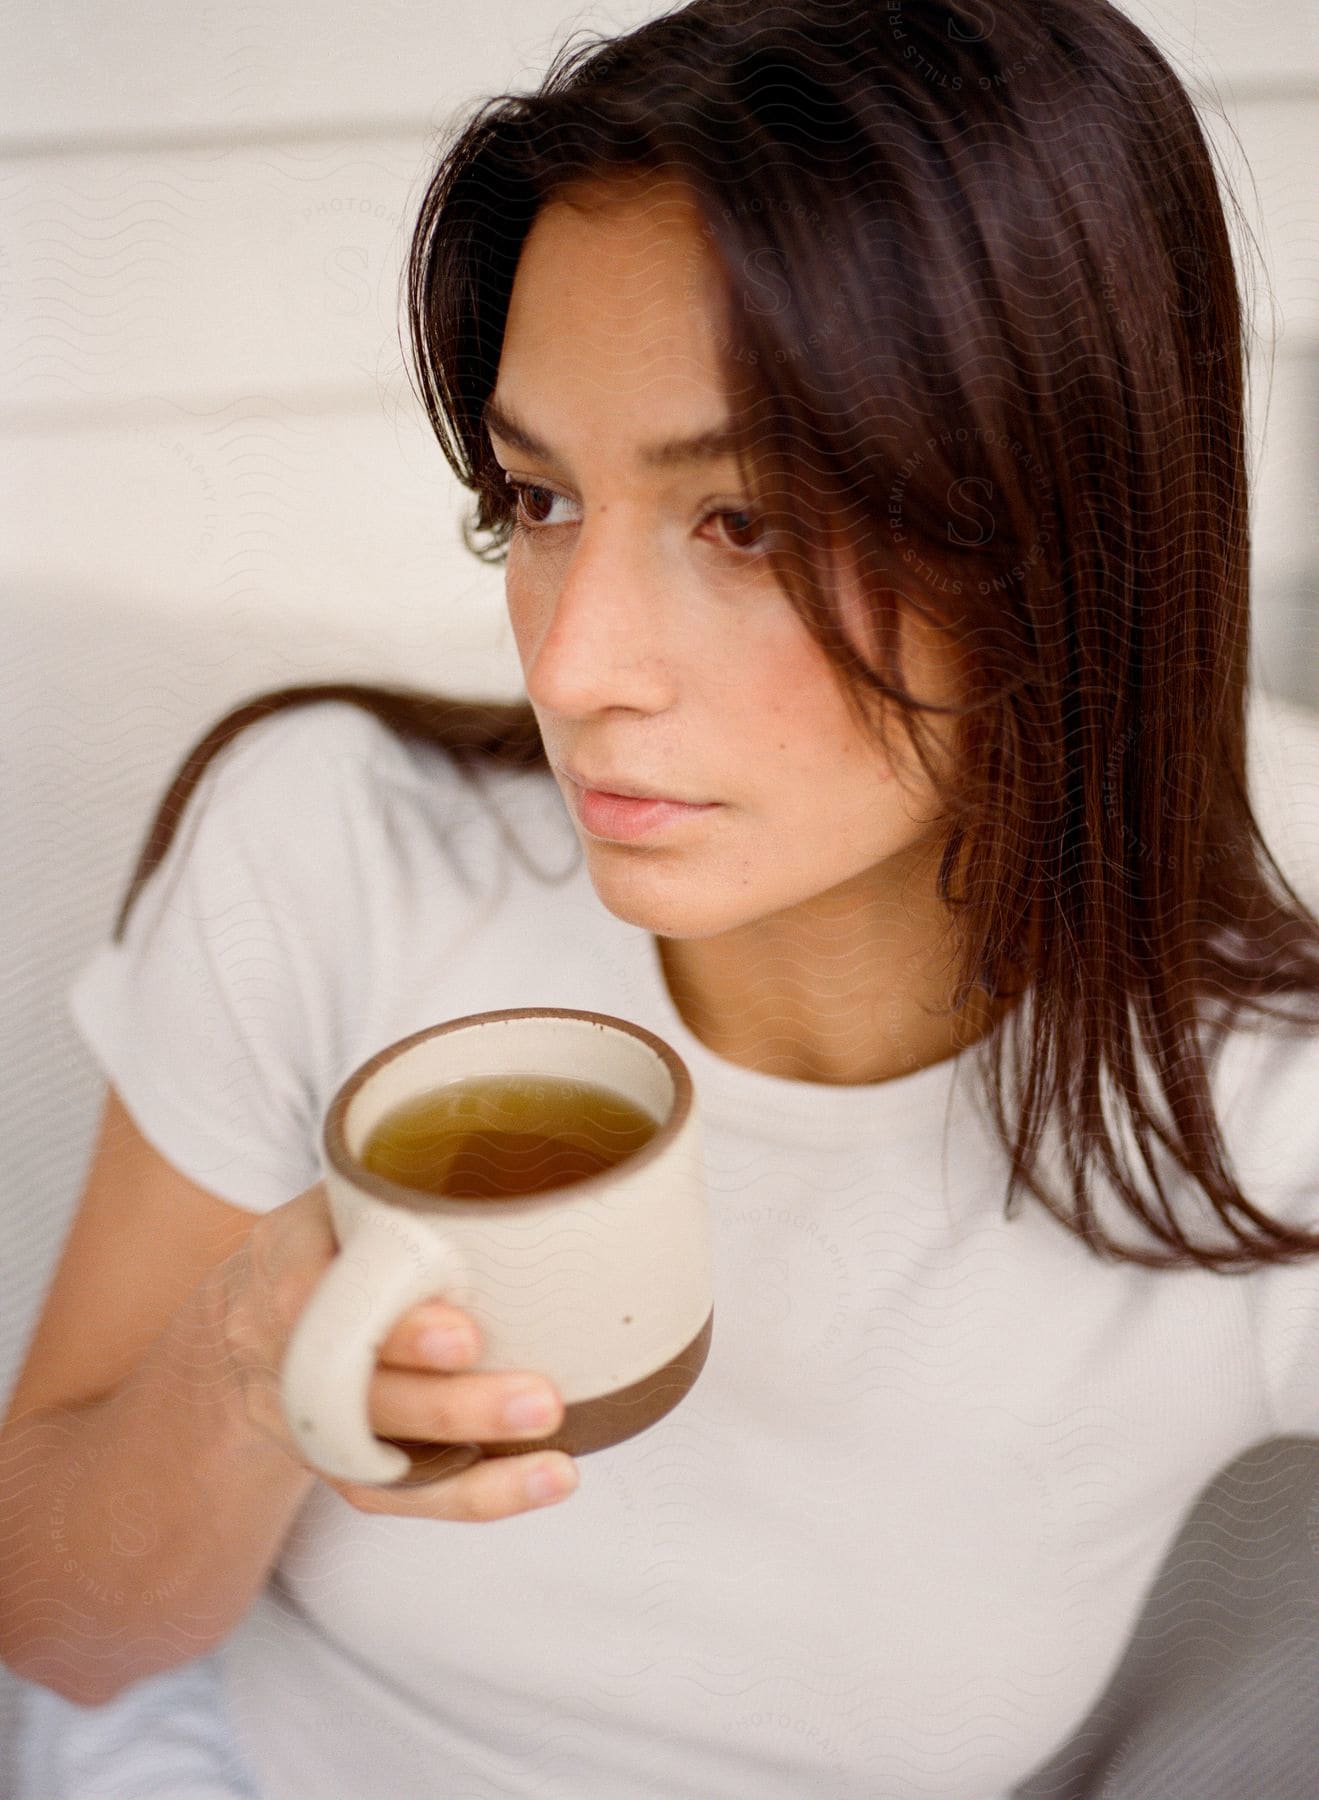 Young woman in a white t-shirt holding a cup of tea.